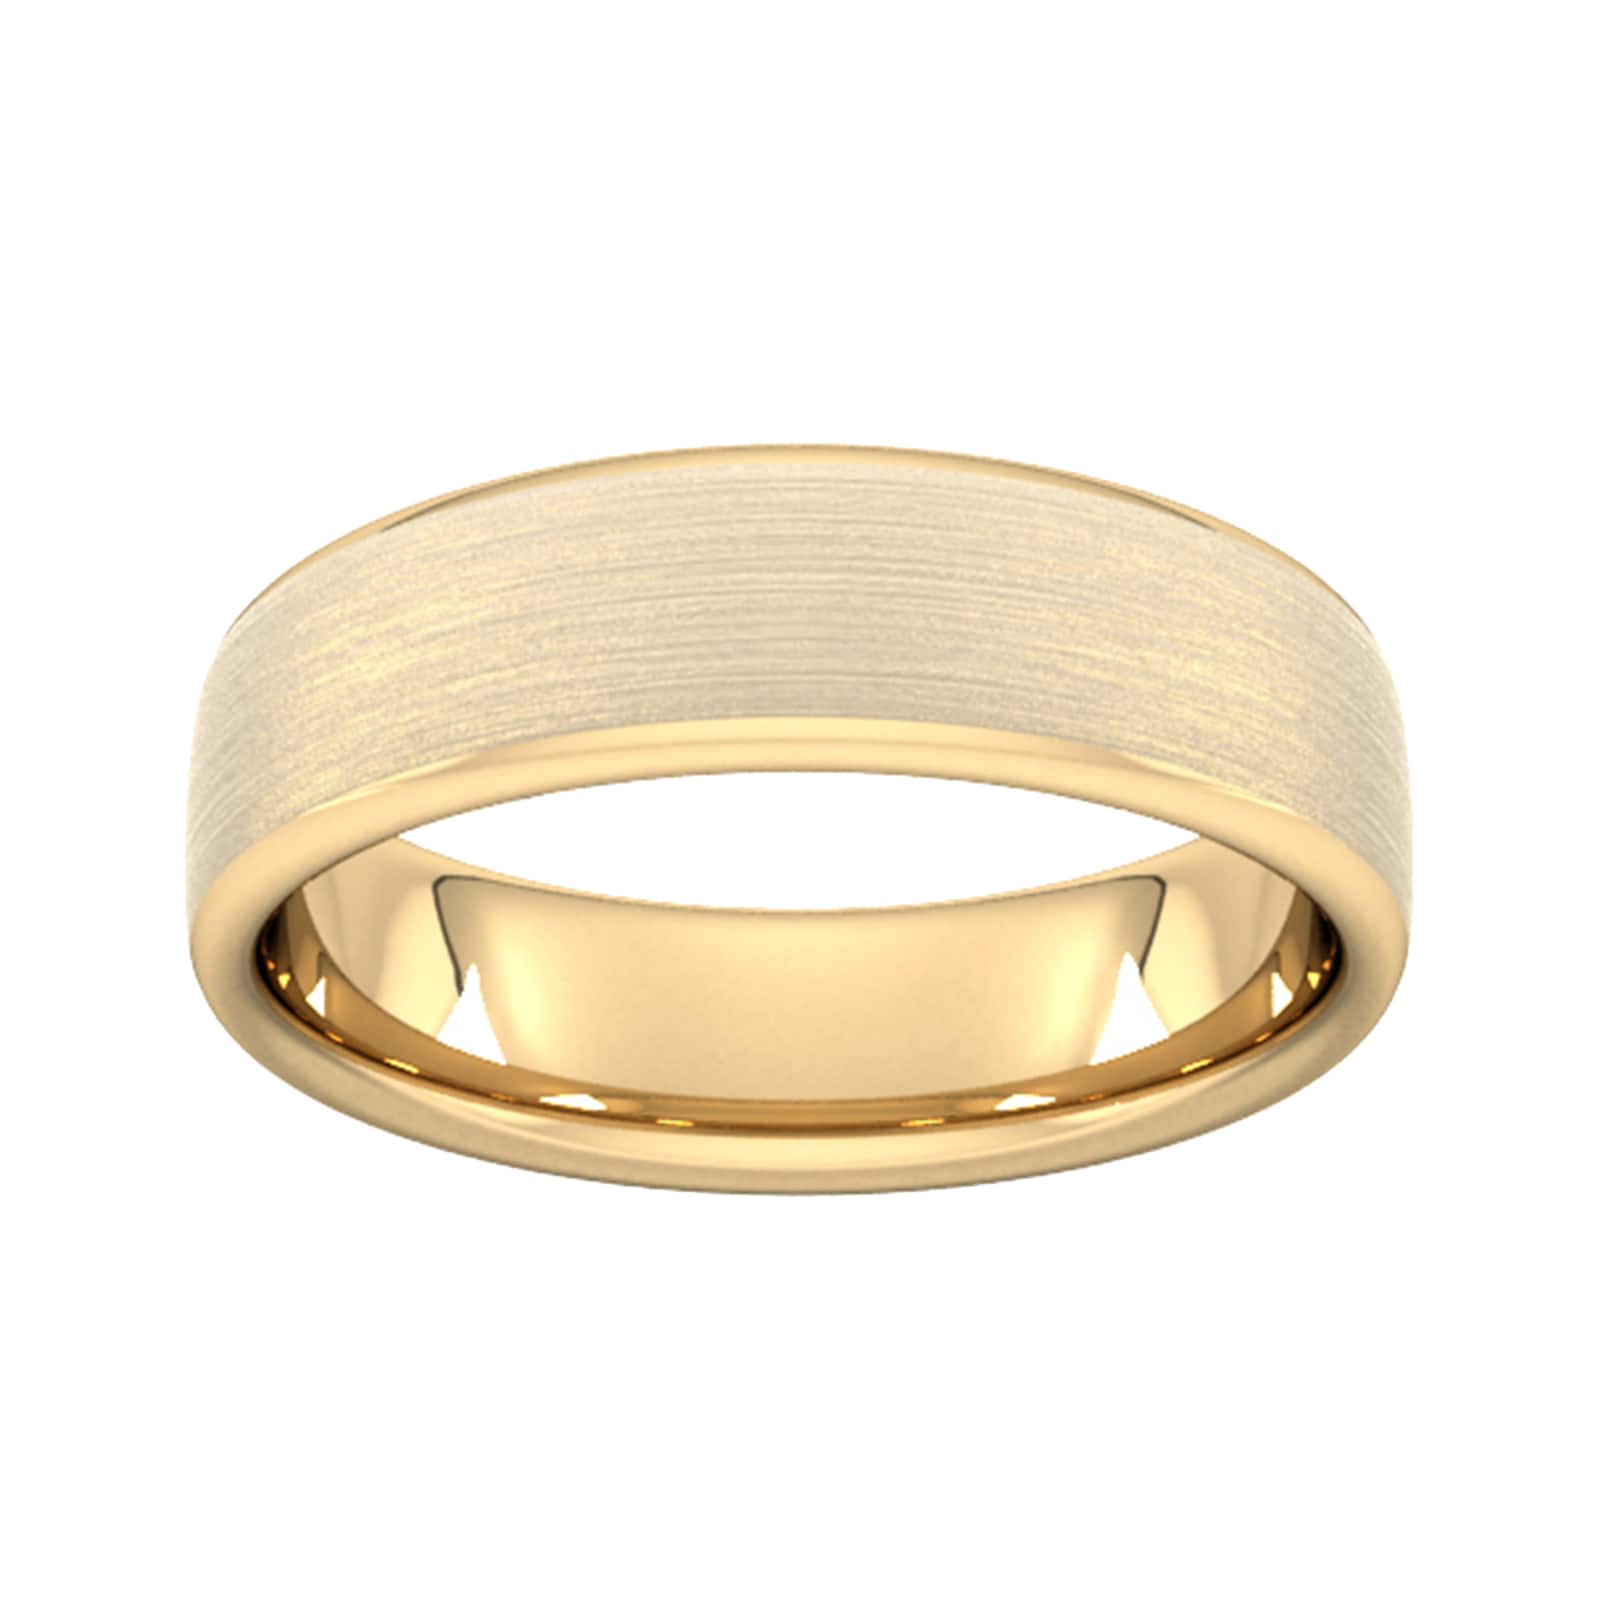 6mm D Shape Heavy Matt Finished Wedding Ring In 9 Carat Yellow Gold - Ring Size M